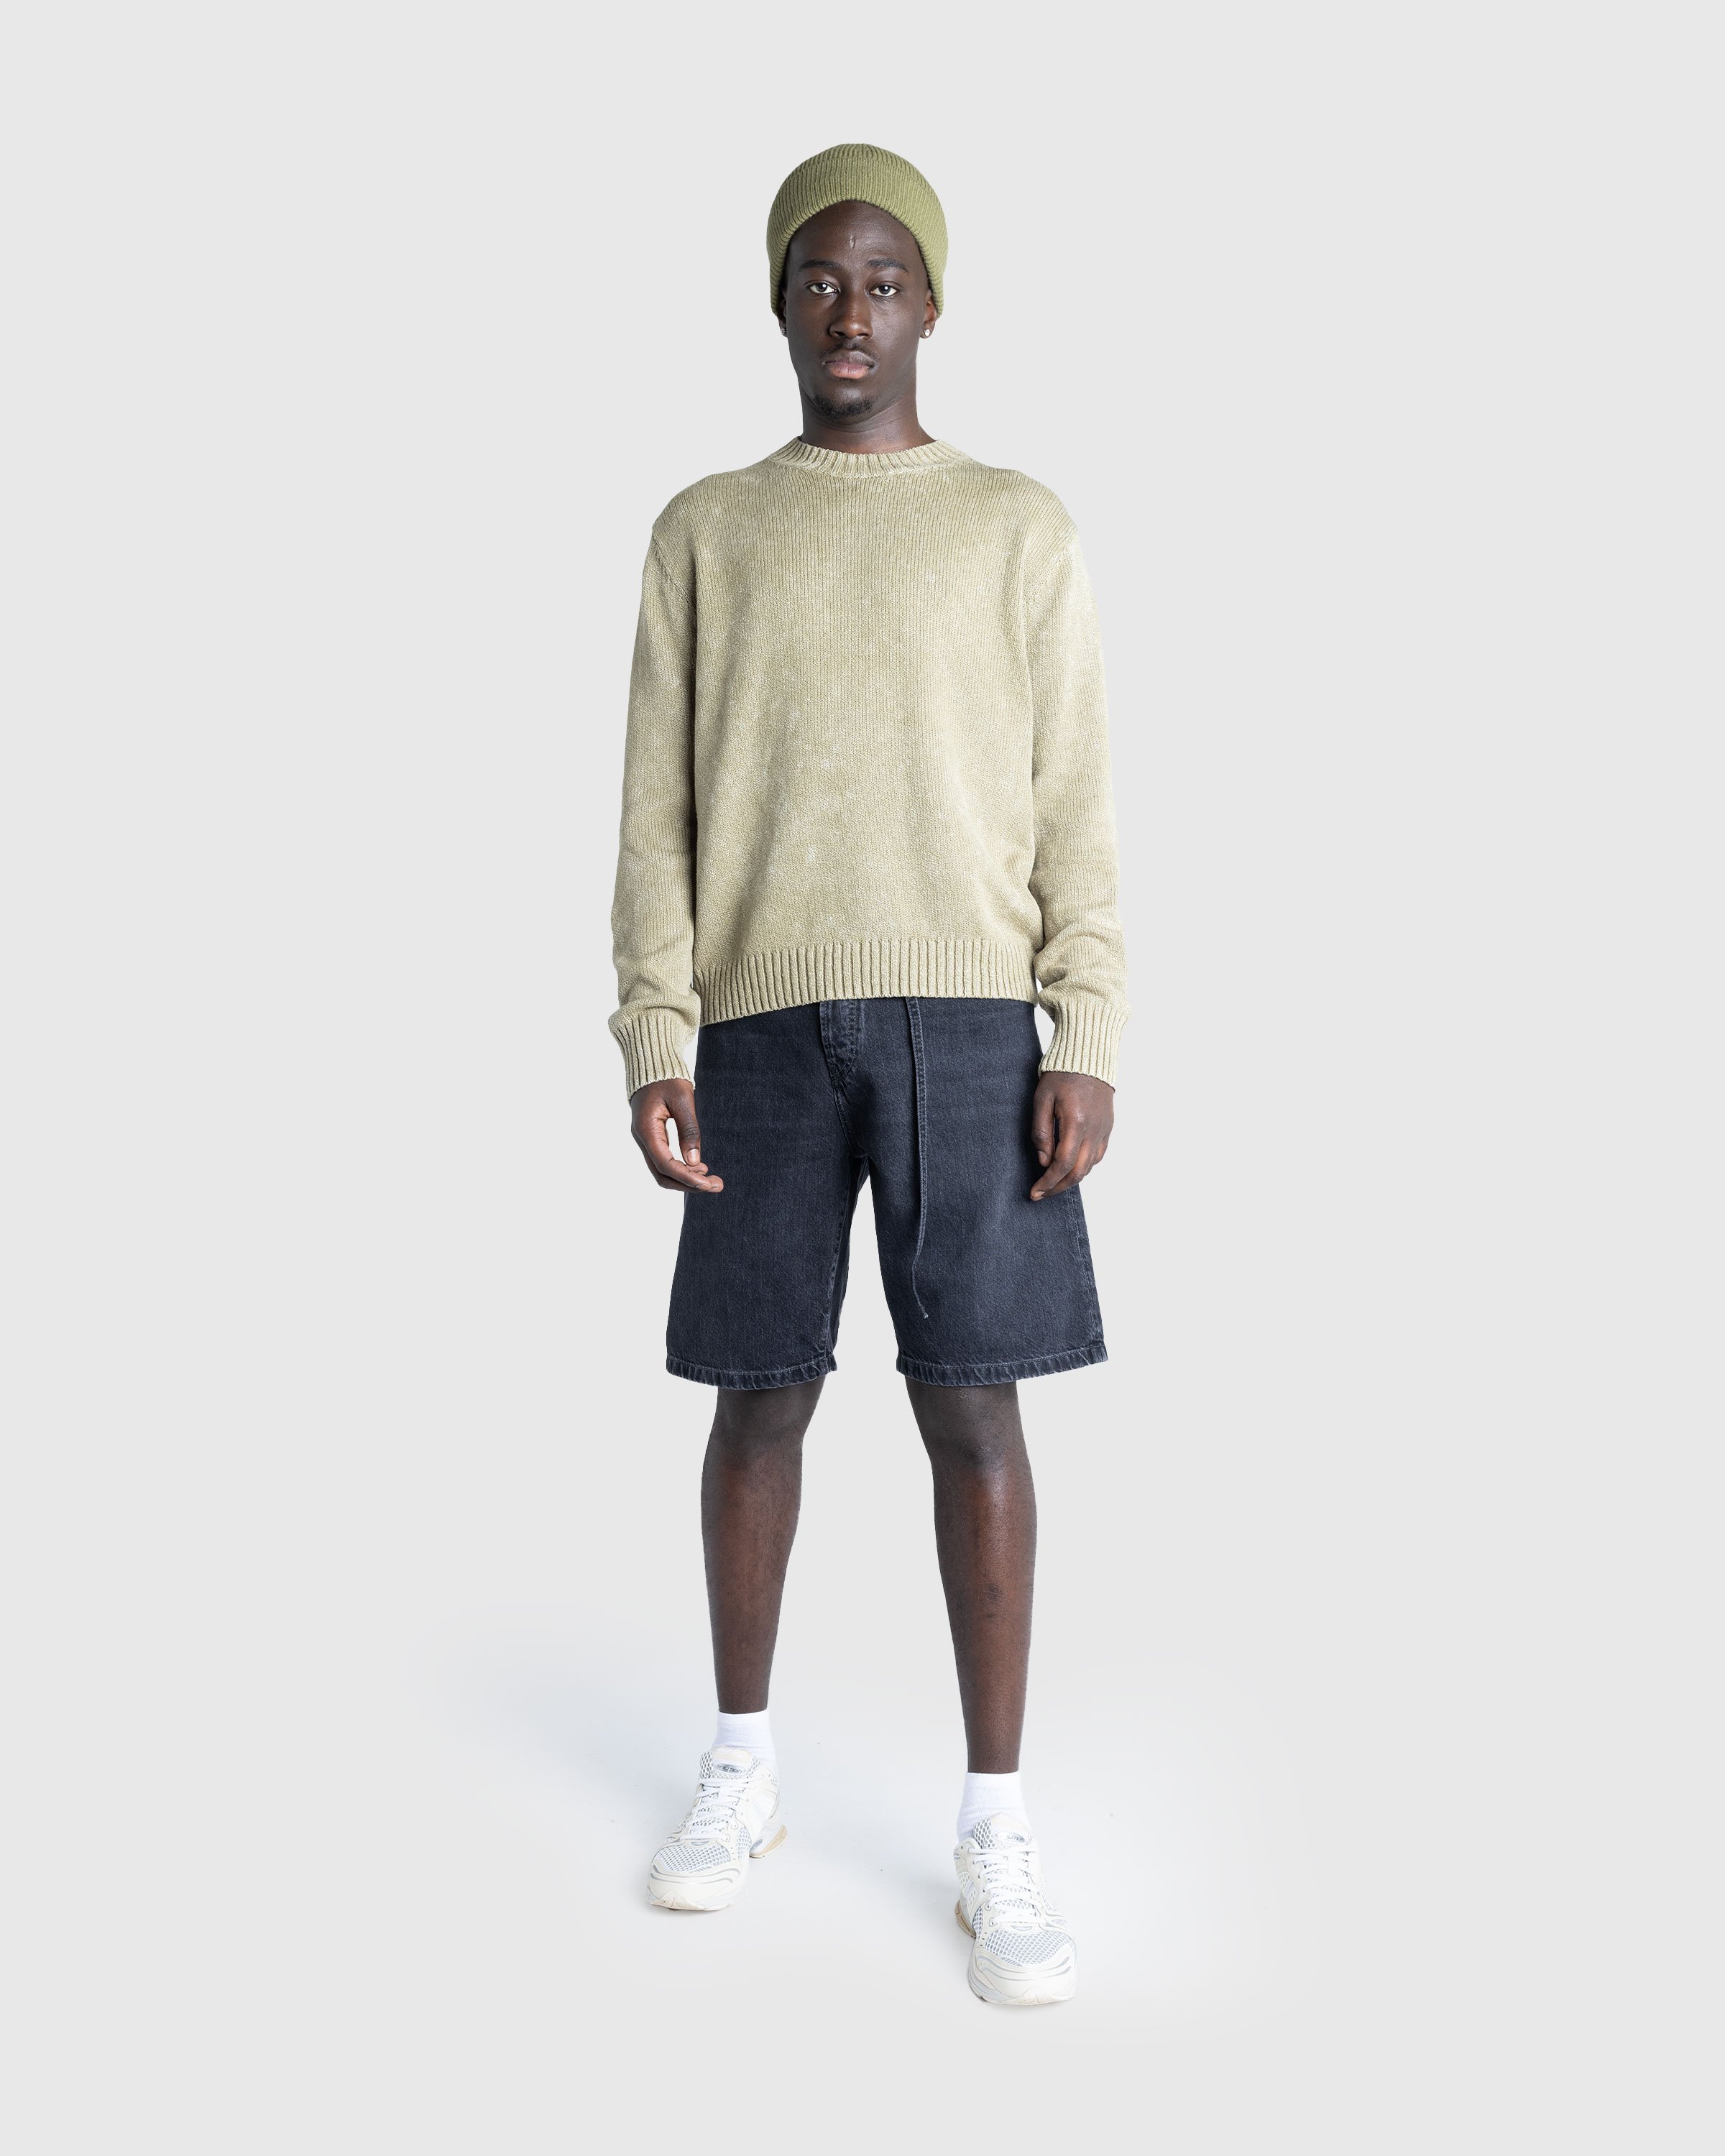 Acne Studios - FN-MN-KNIT000443 Olive Green - Clothing - Green - Image 3